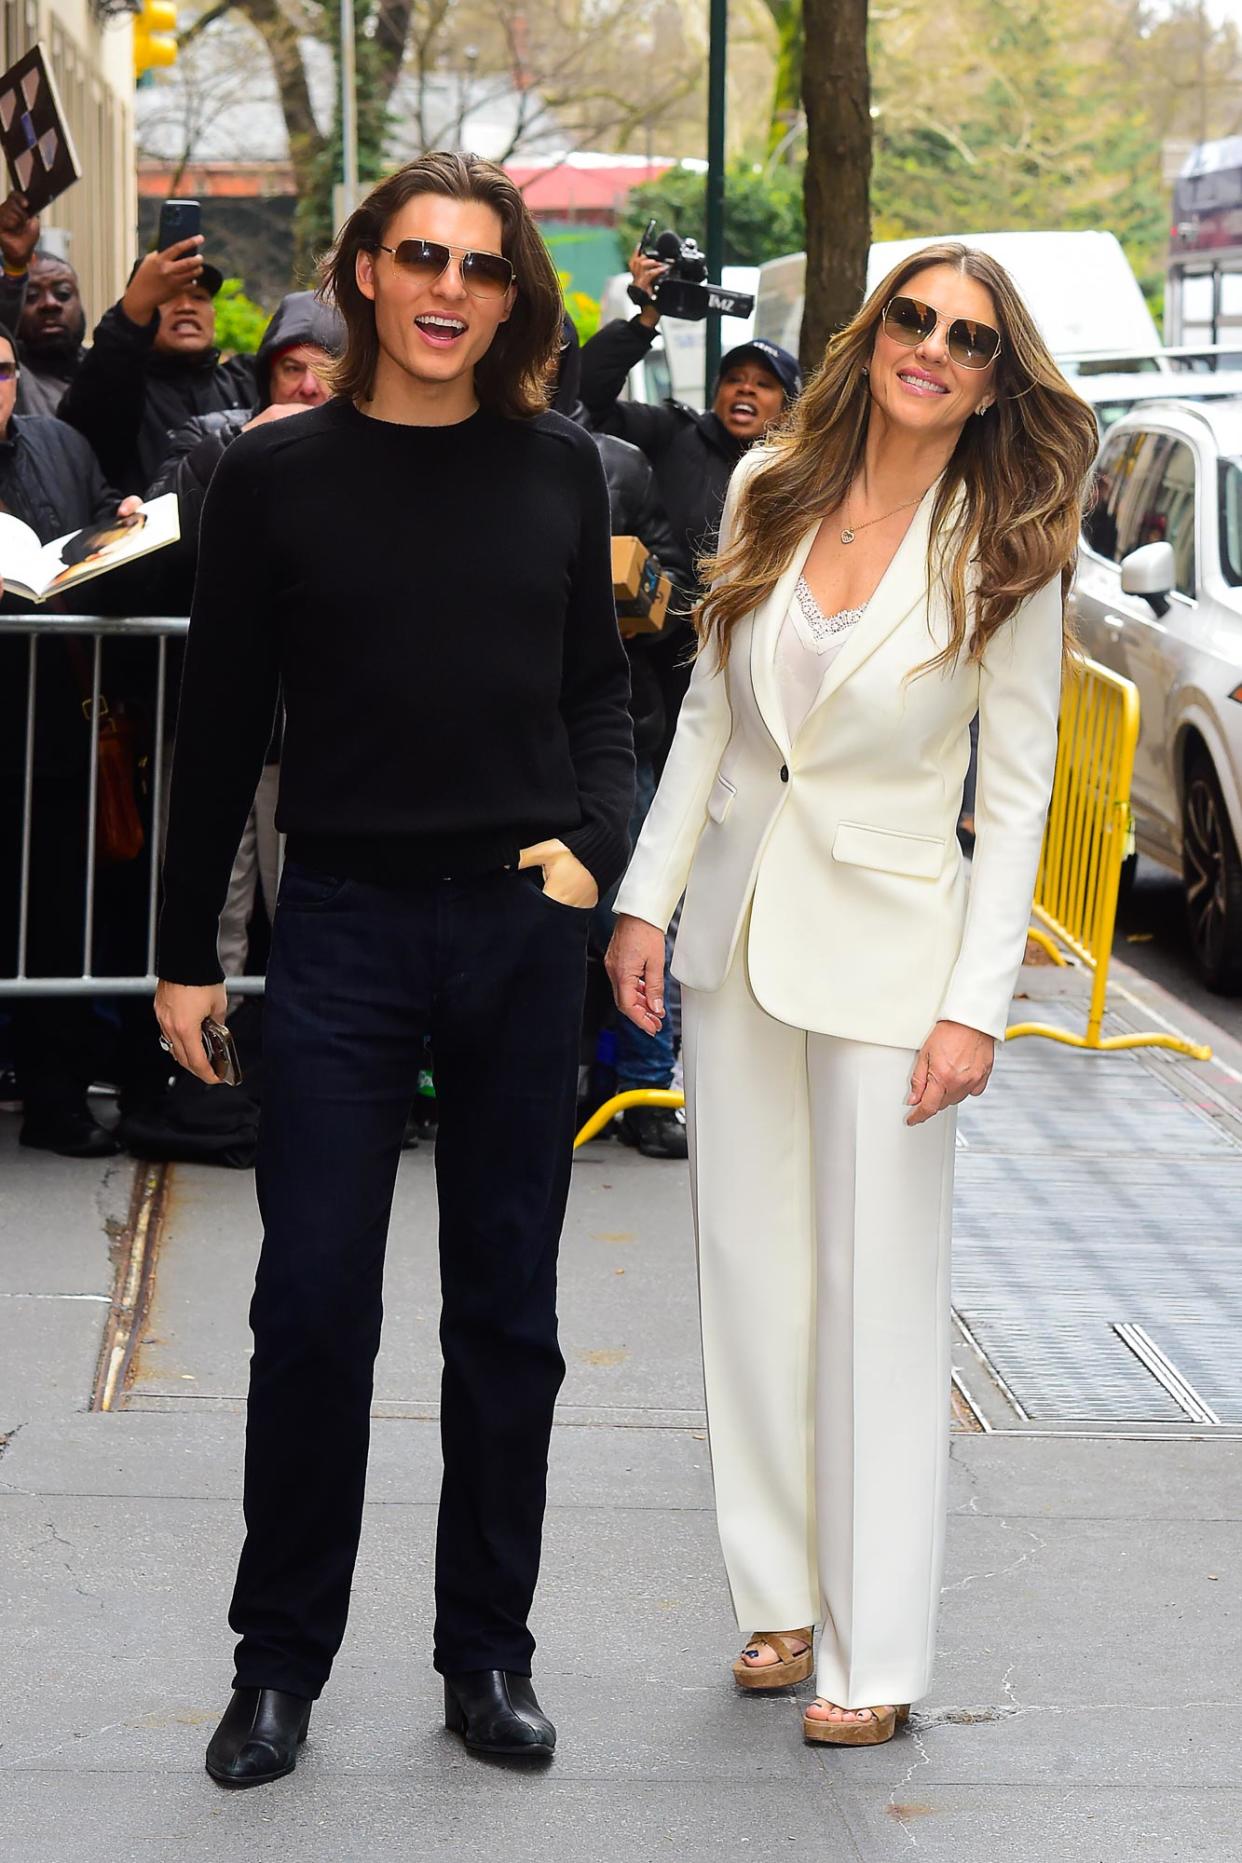 Elizabeth Hurley s Son Damian Would Hide on Gossip Girl and Learn All Blake Lively s Lines 213